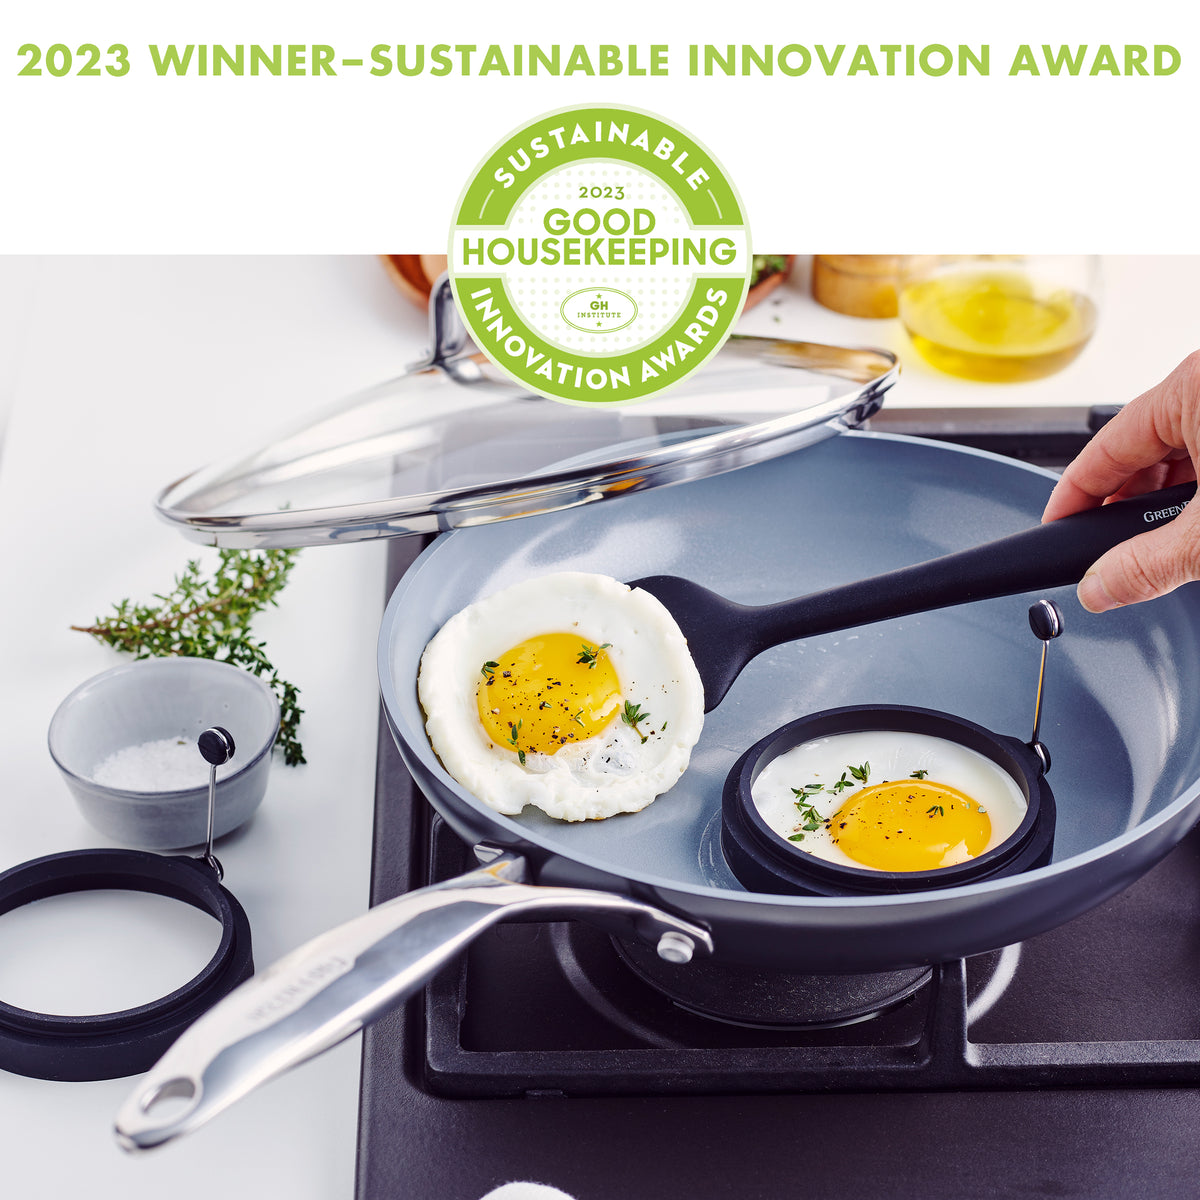 The Best Frying Pans for Eggs of 2023